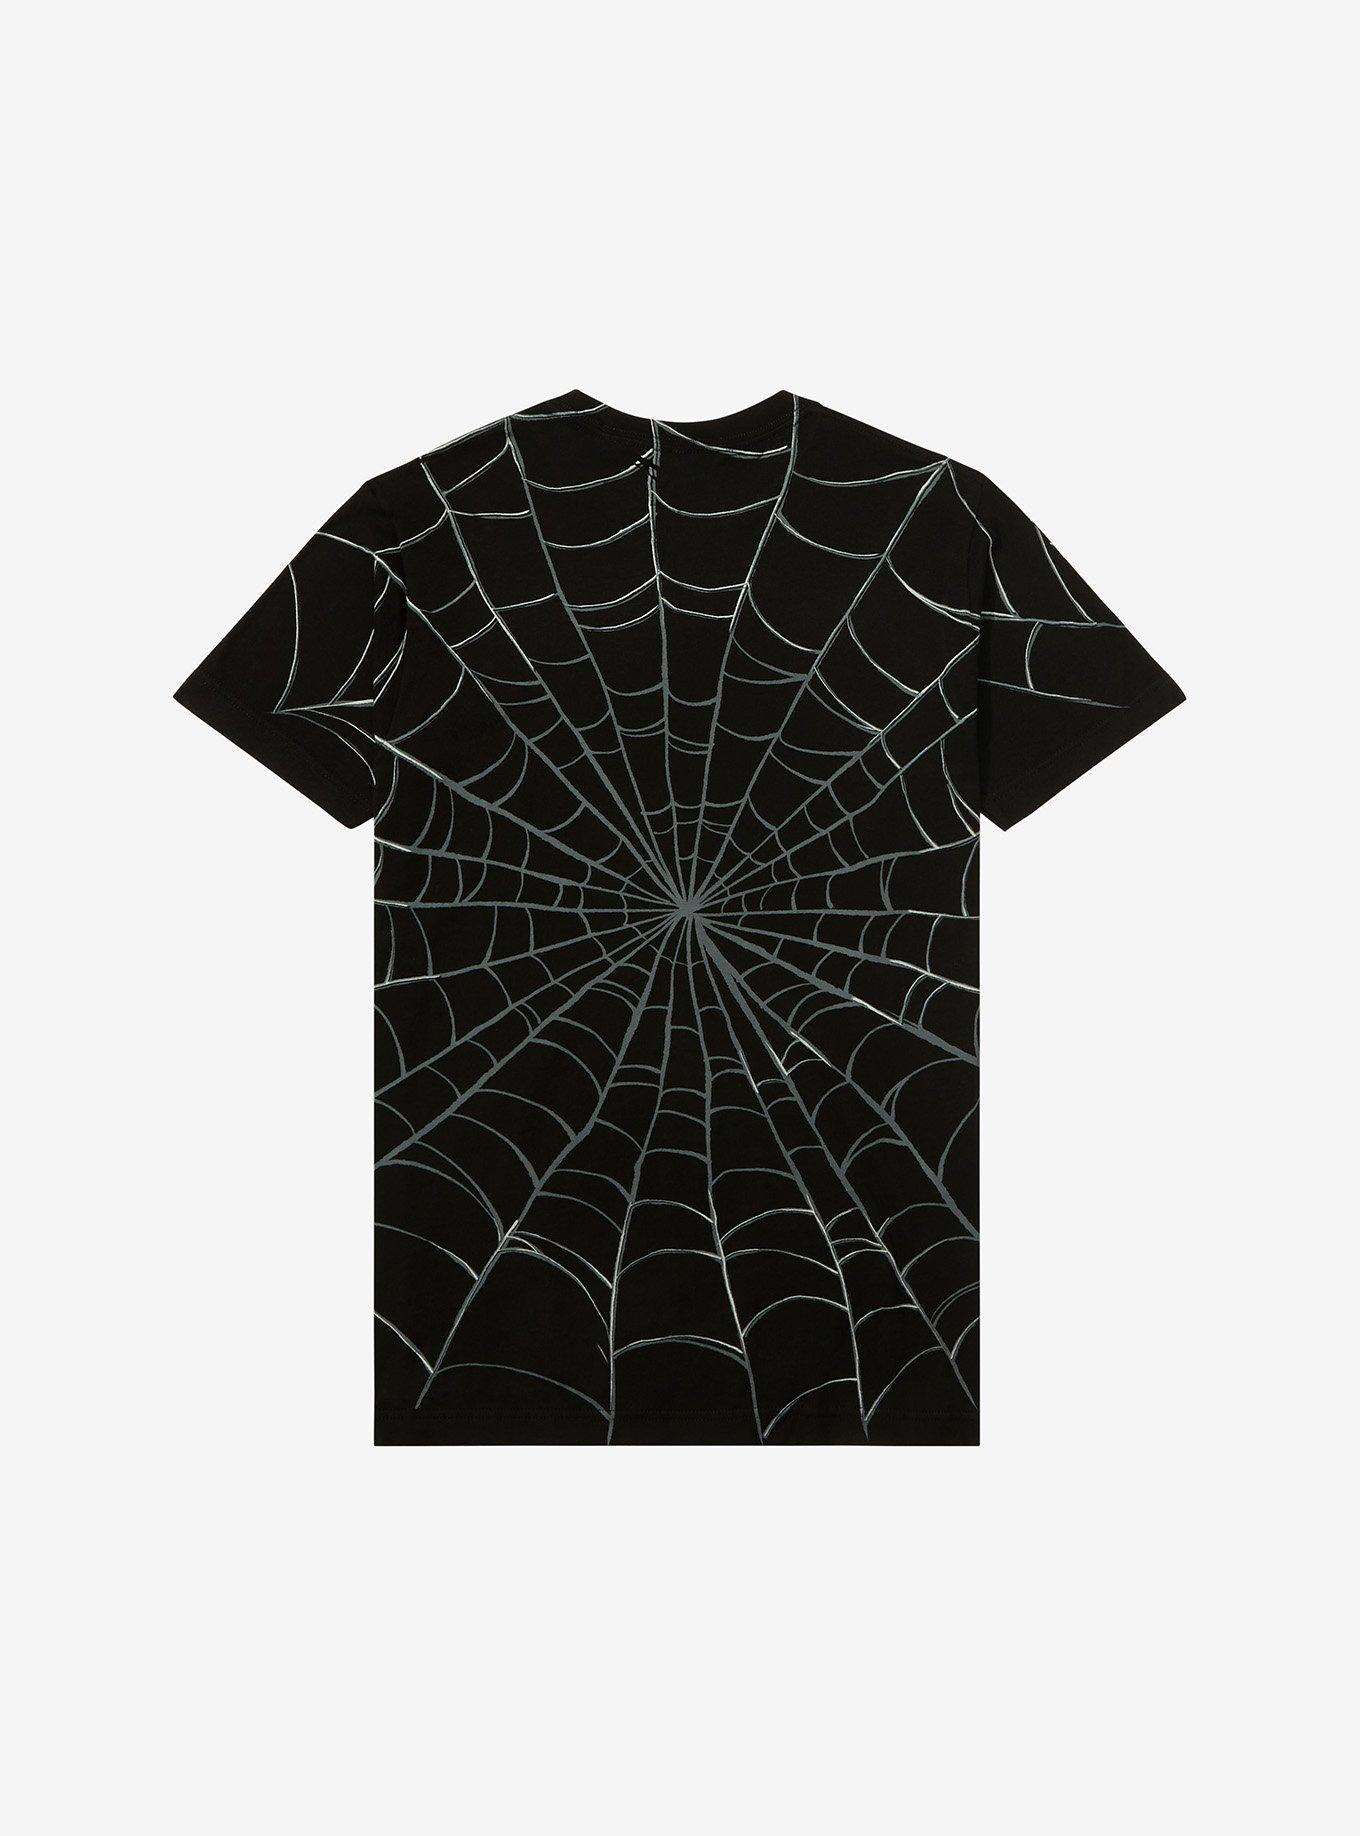 The Nightmare Before Christmas Jack Spiderweb Double-Sided T-Shirt, BLACK, alternate